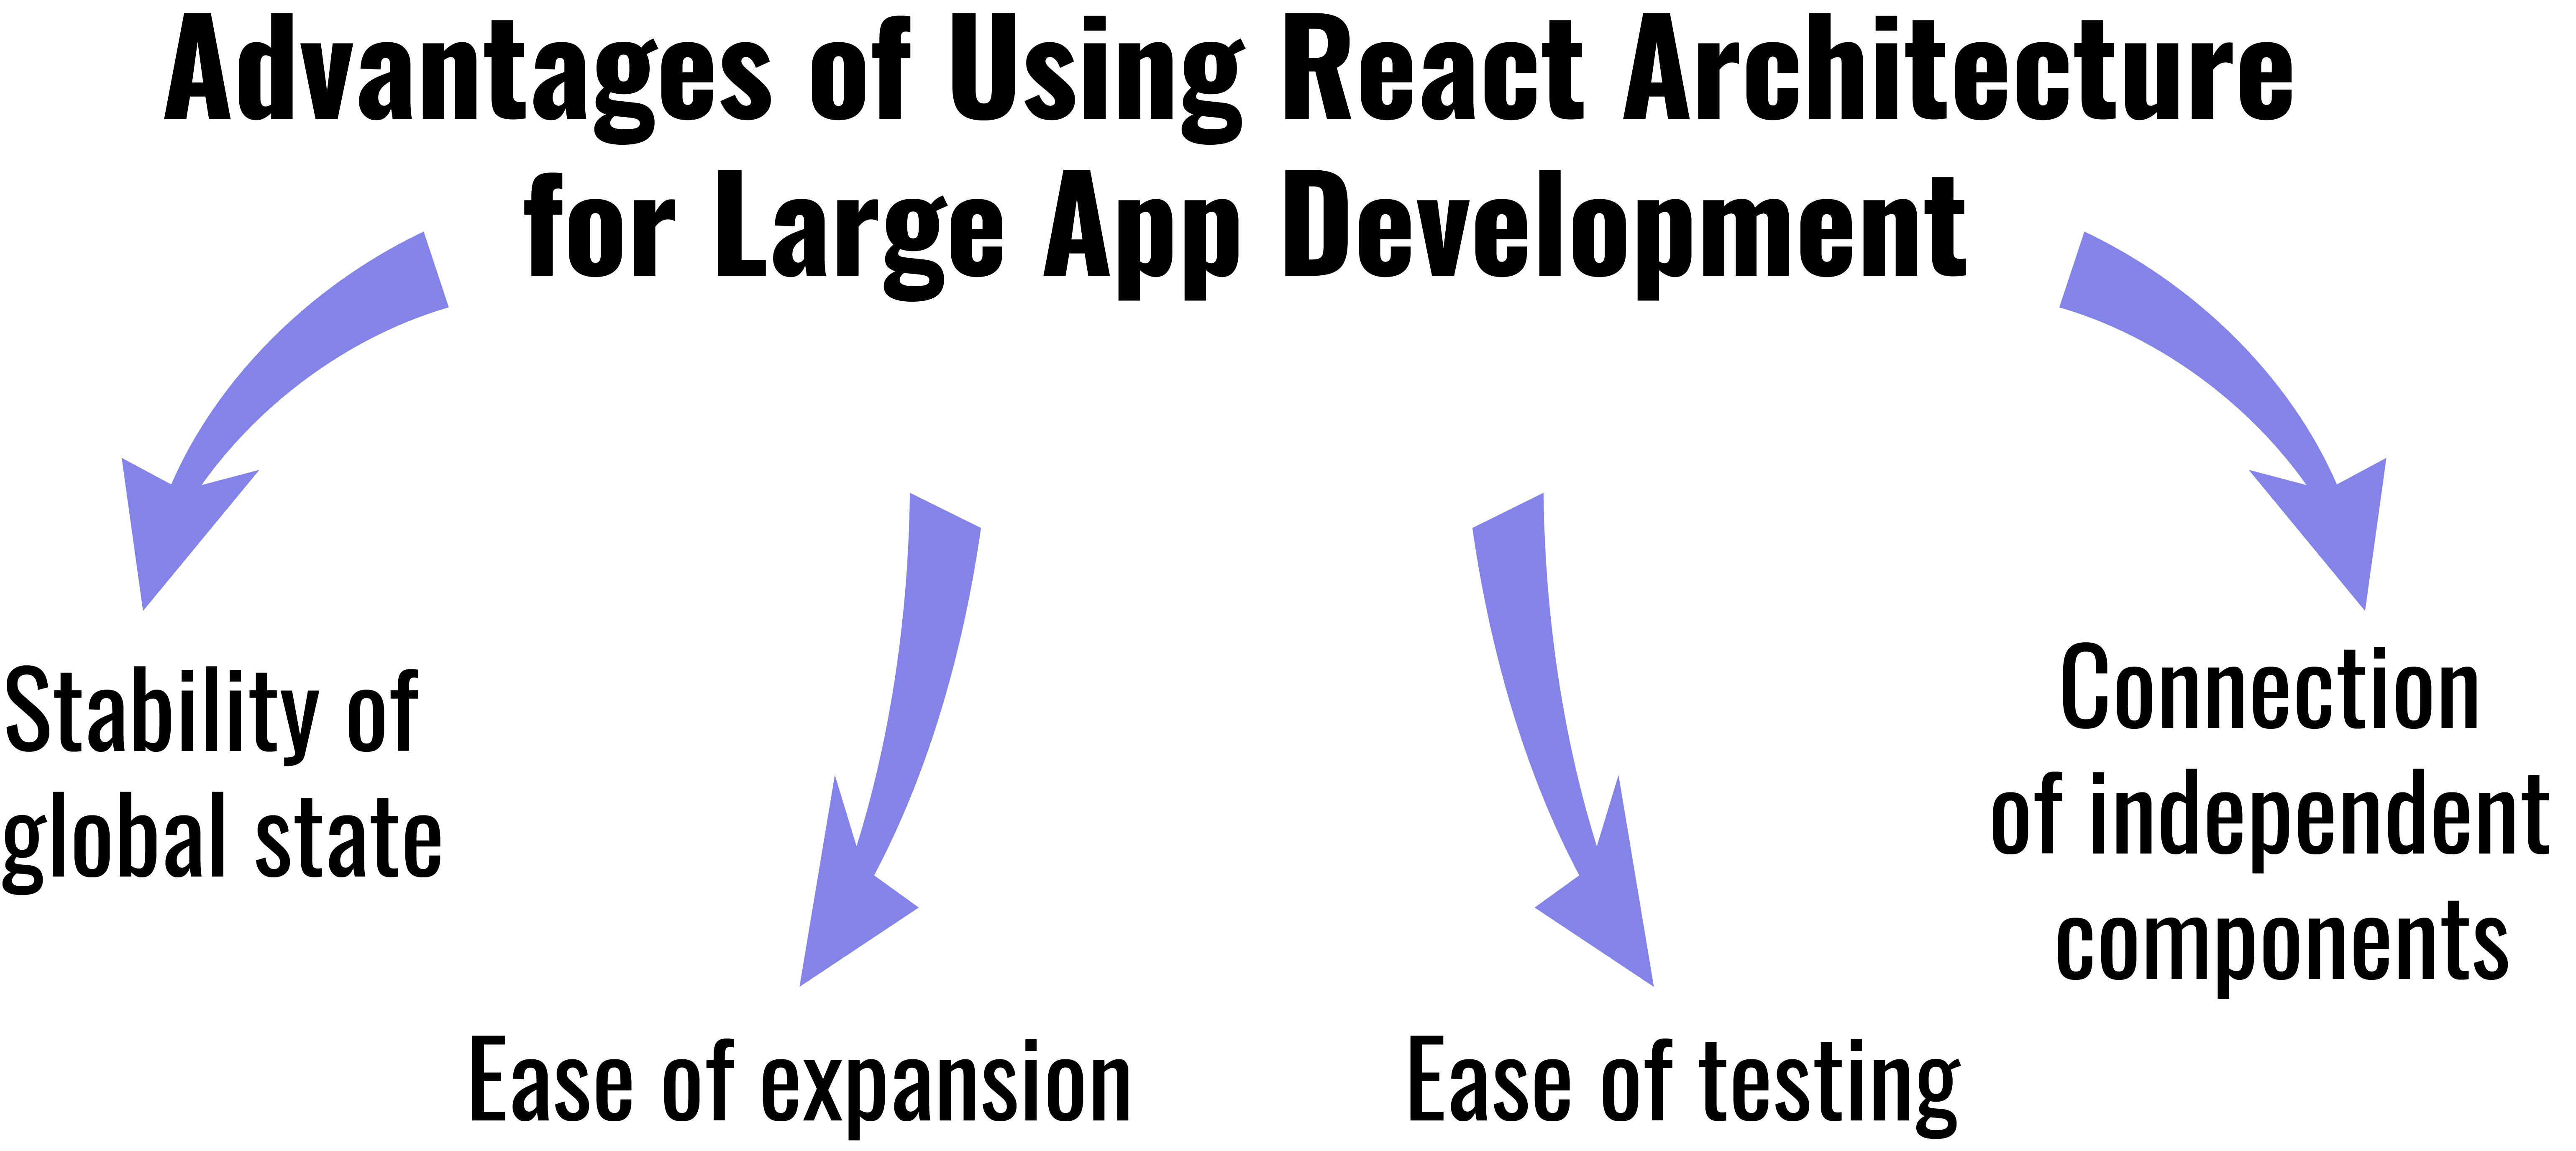 Benefits of using React for large application development